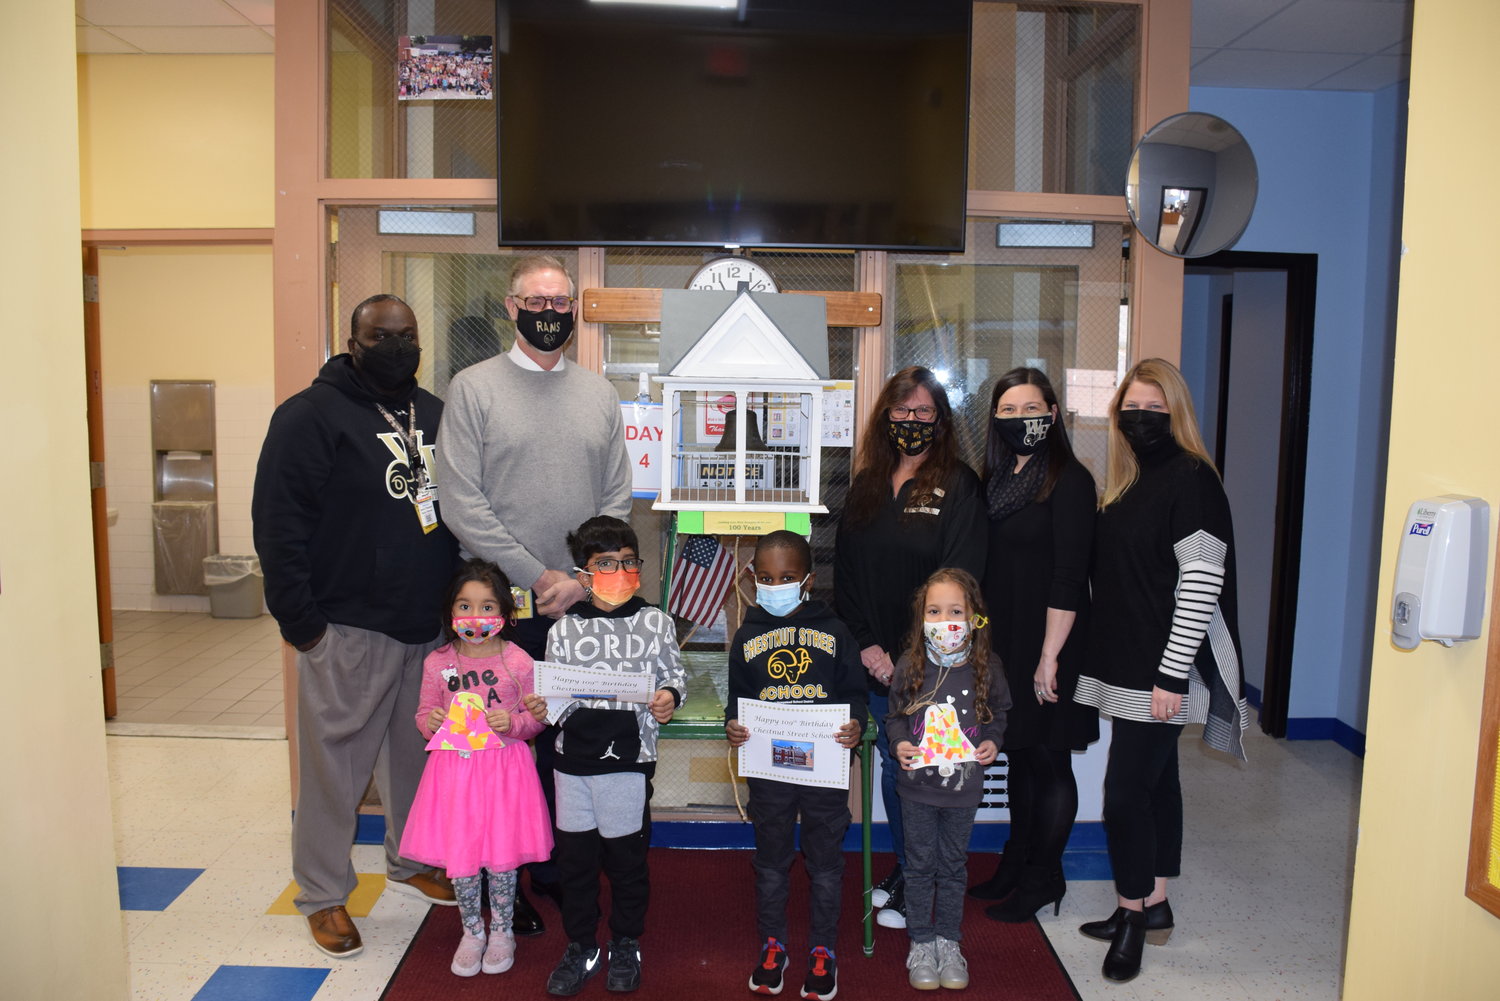 Students and staff celebrated Chestnut Street School’s 109th birthday on Jan. 14.